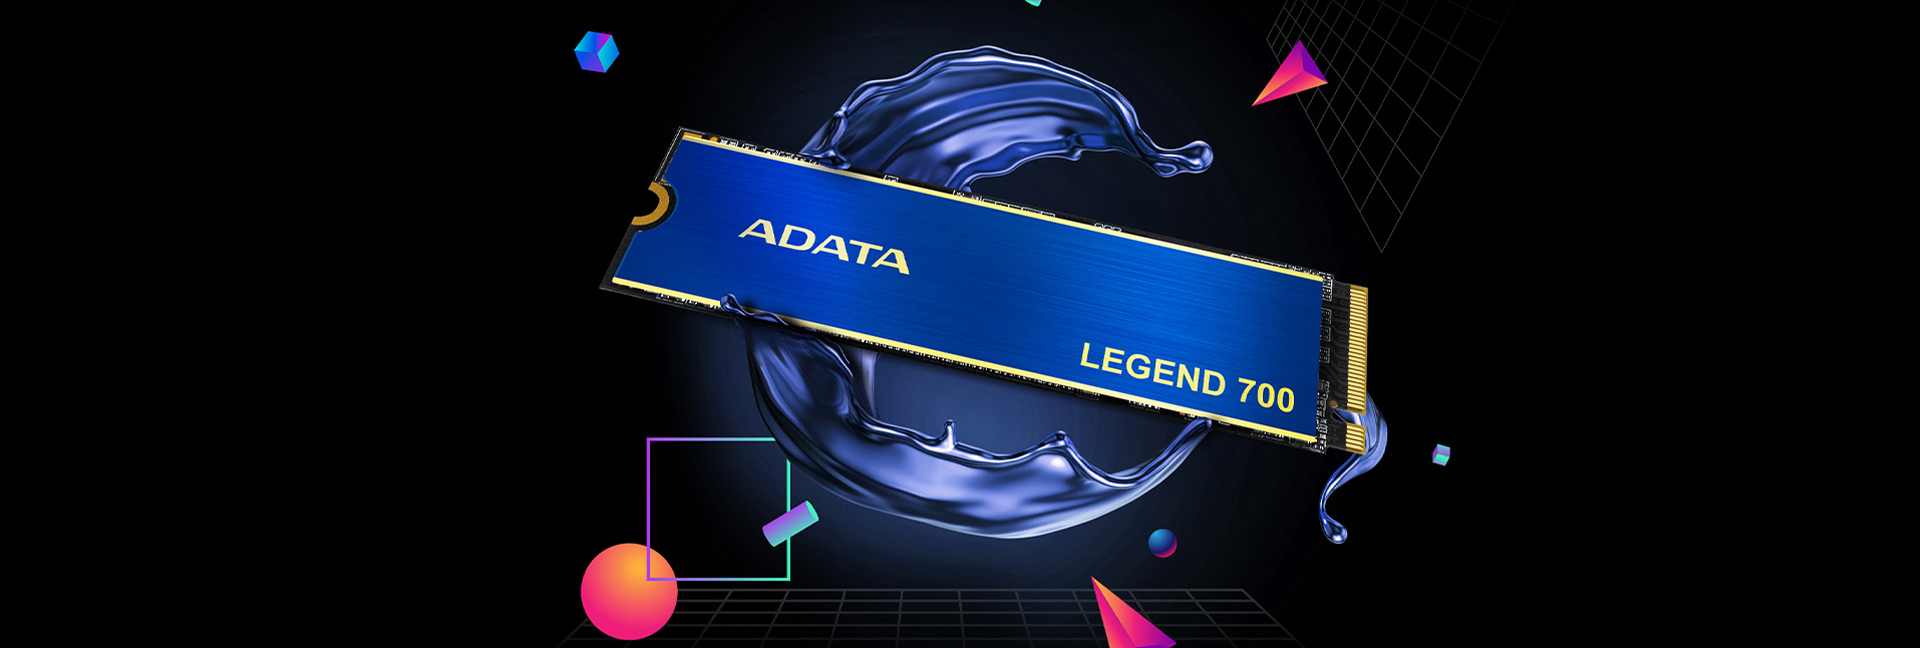 LEGEND 700 PCIe Gen3 x4 M.2 2280 Solid State Drive (Global)